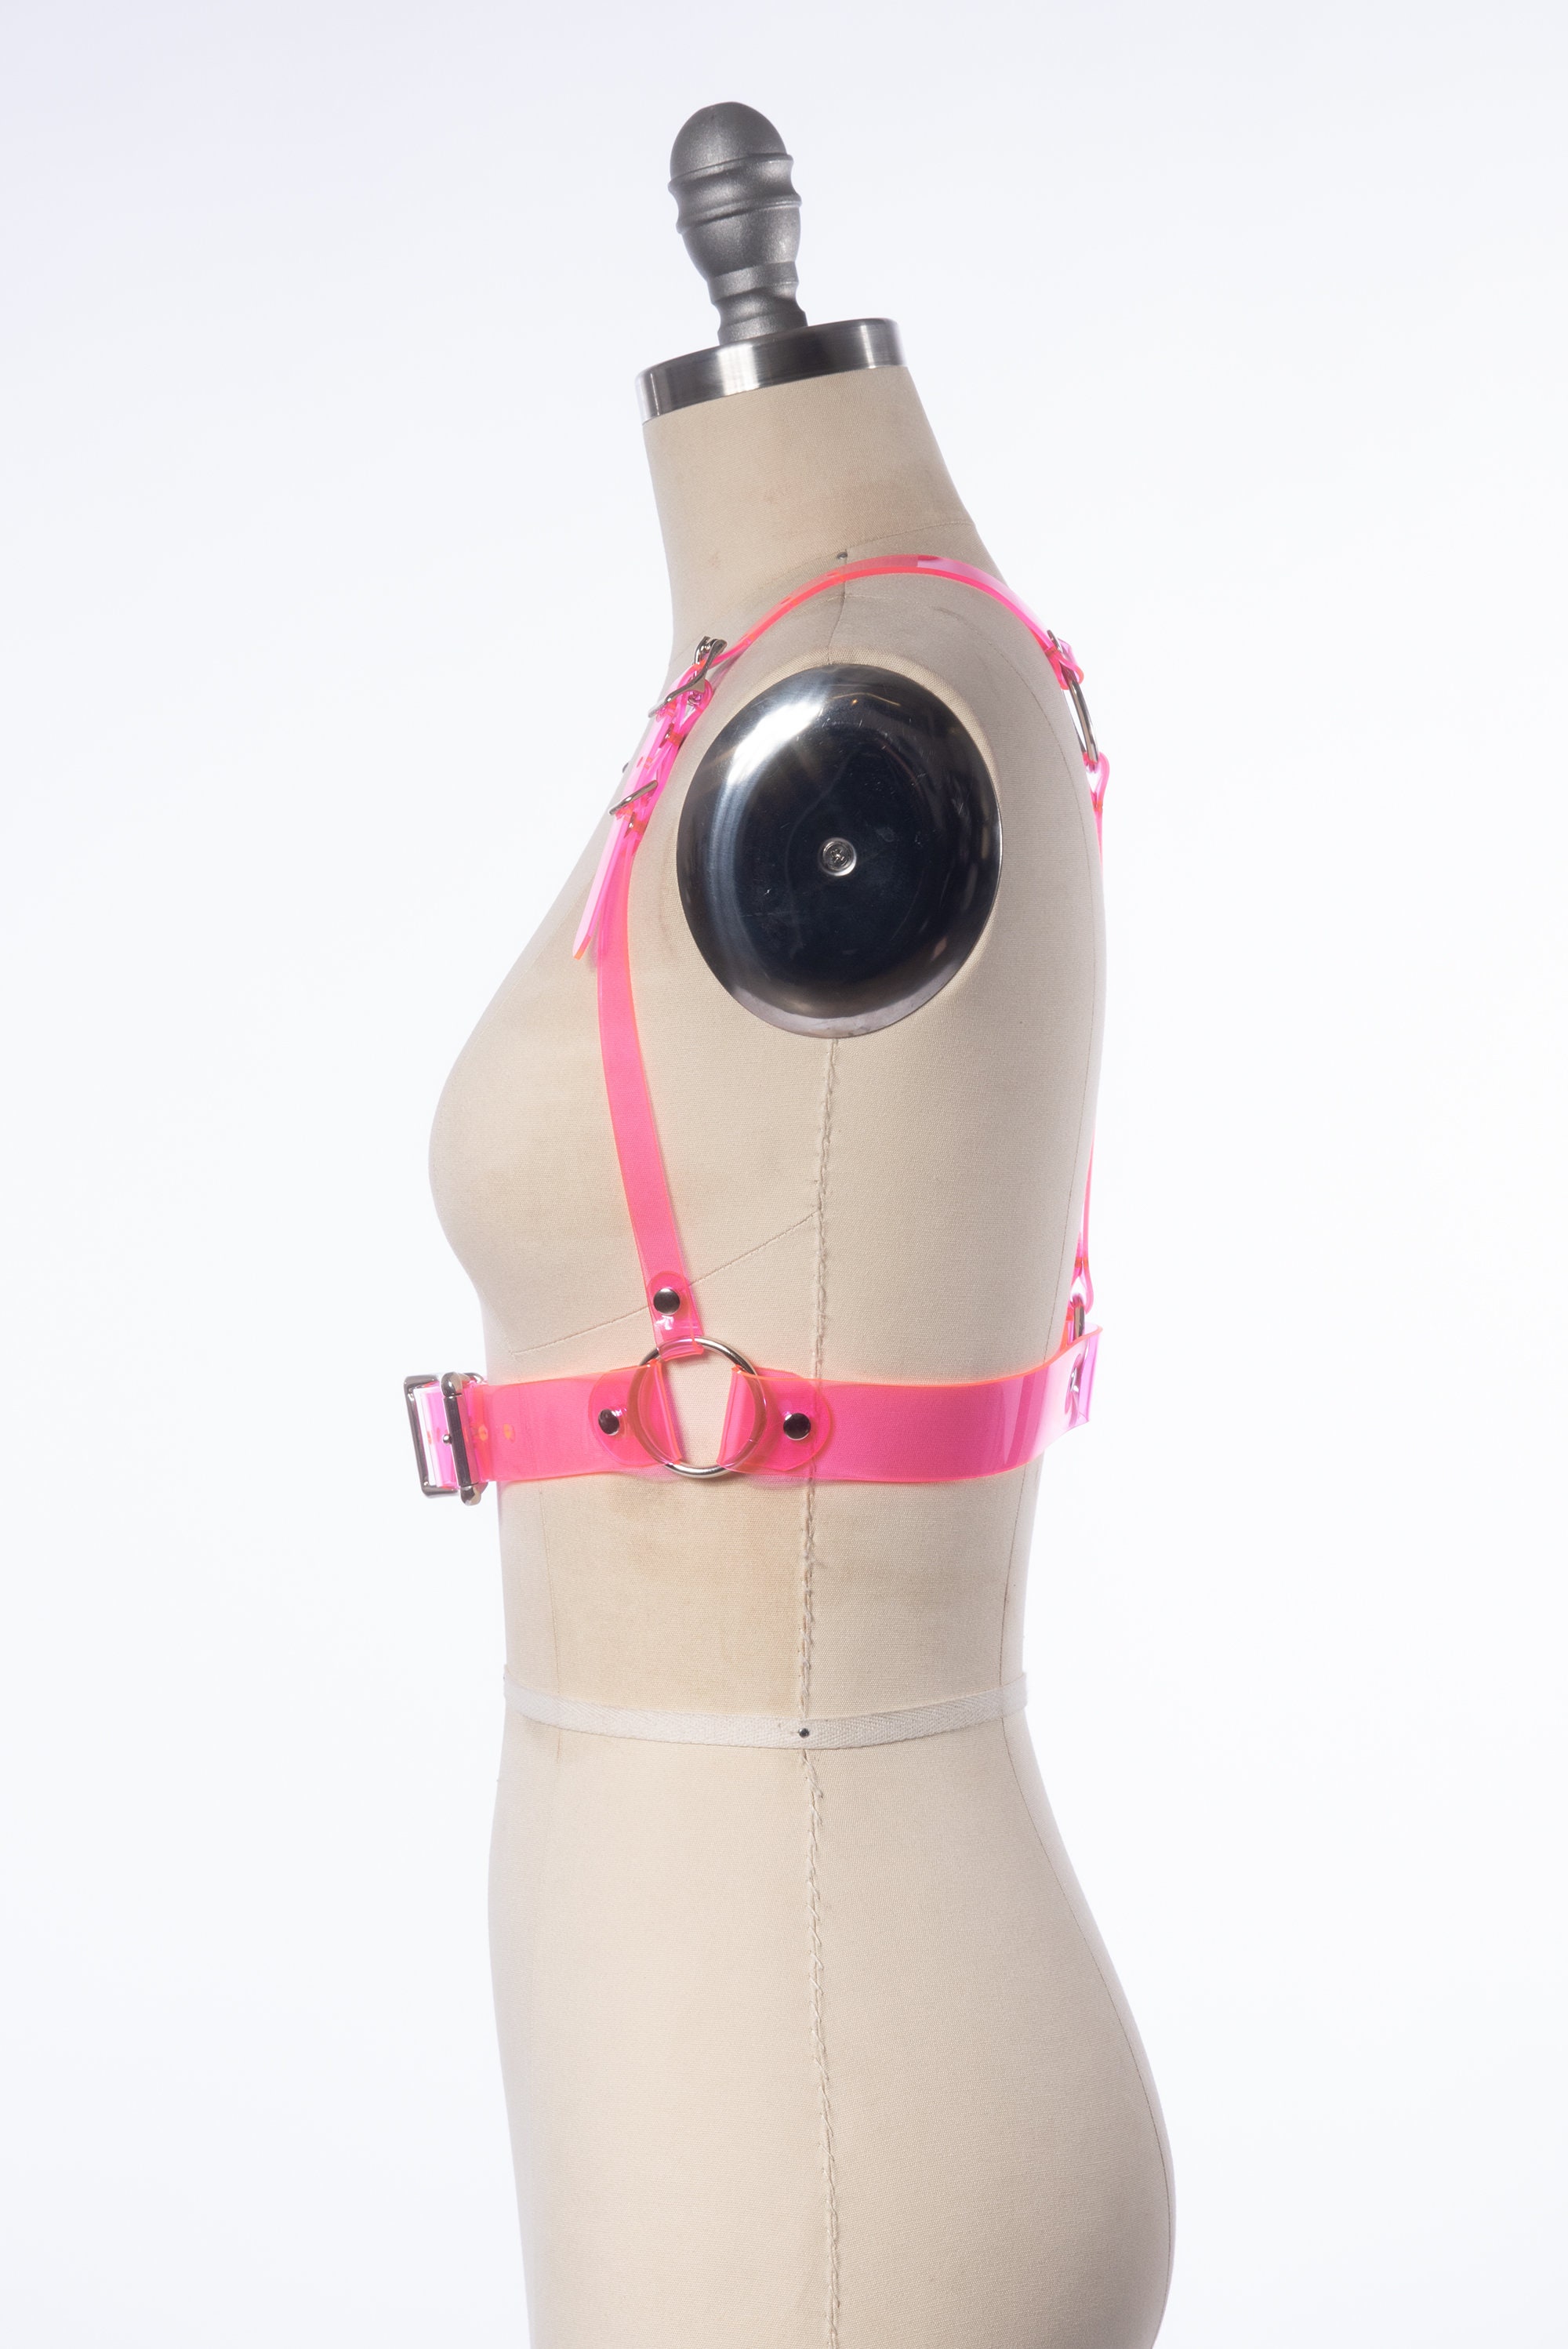 Apatico - Heart Shaped Bullet Bra Harness - Pvc - Leather